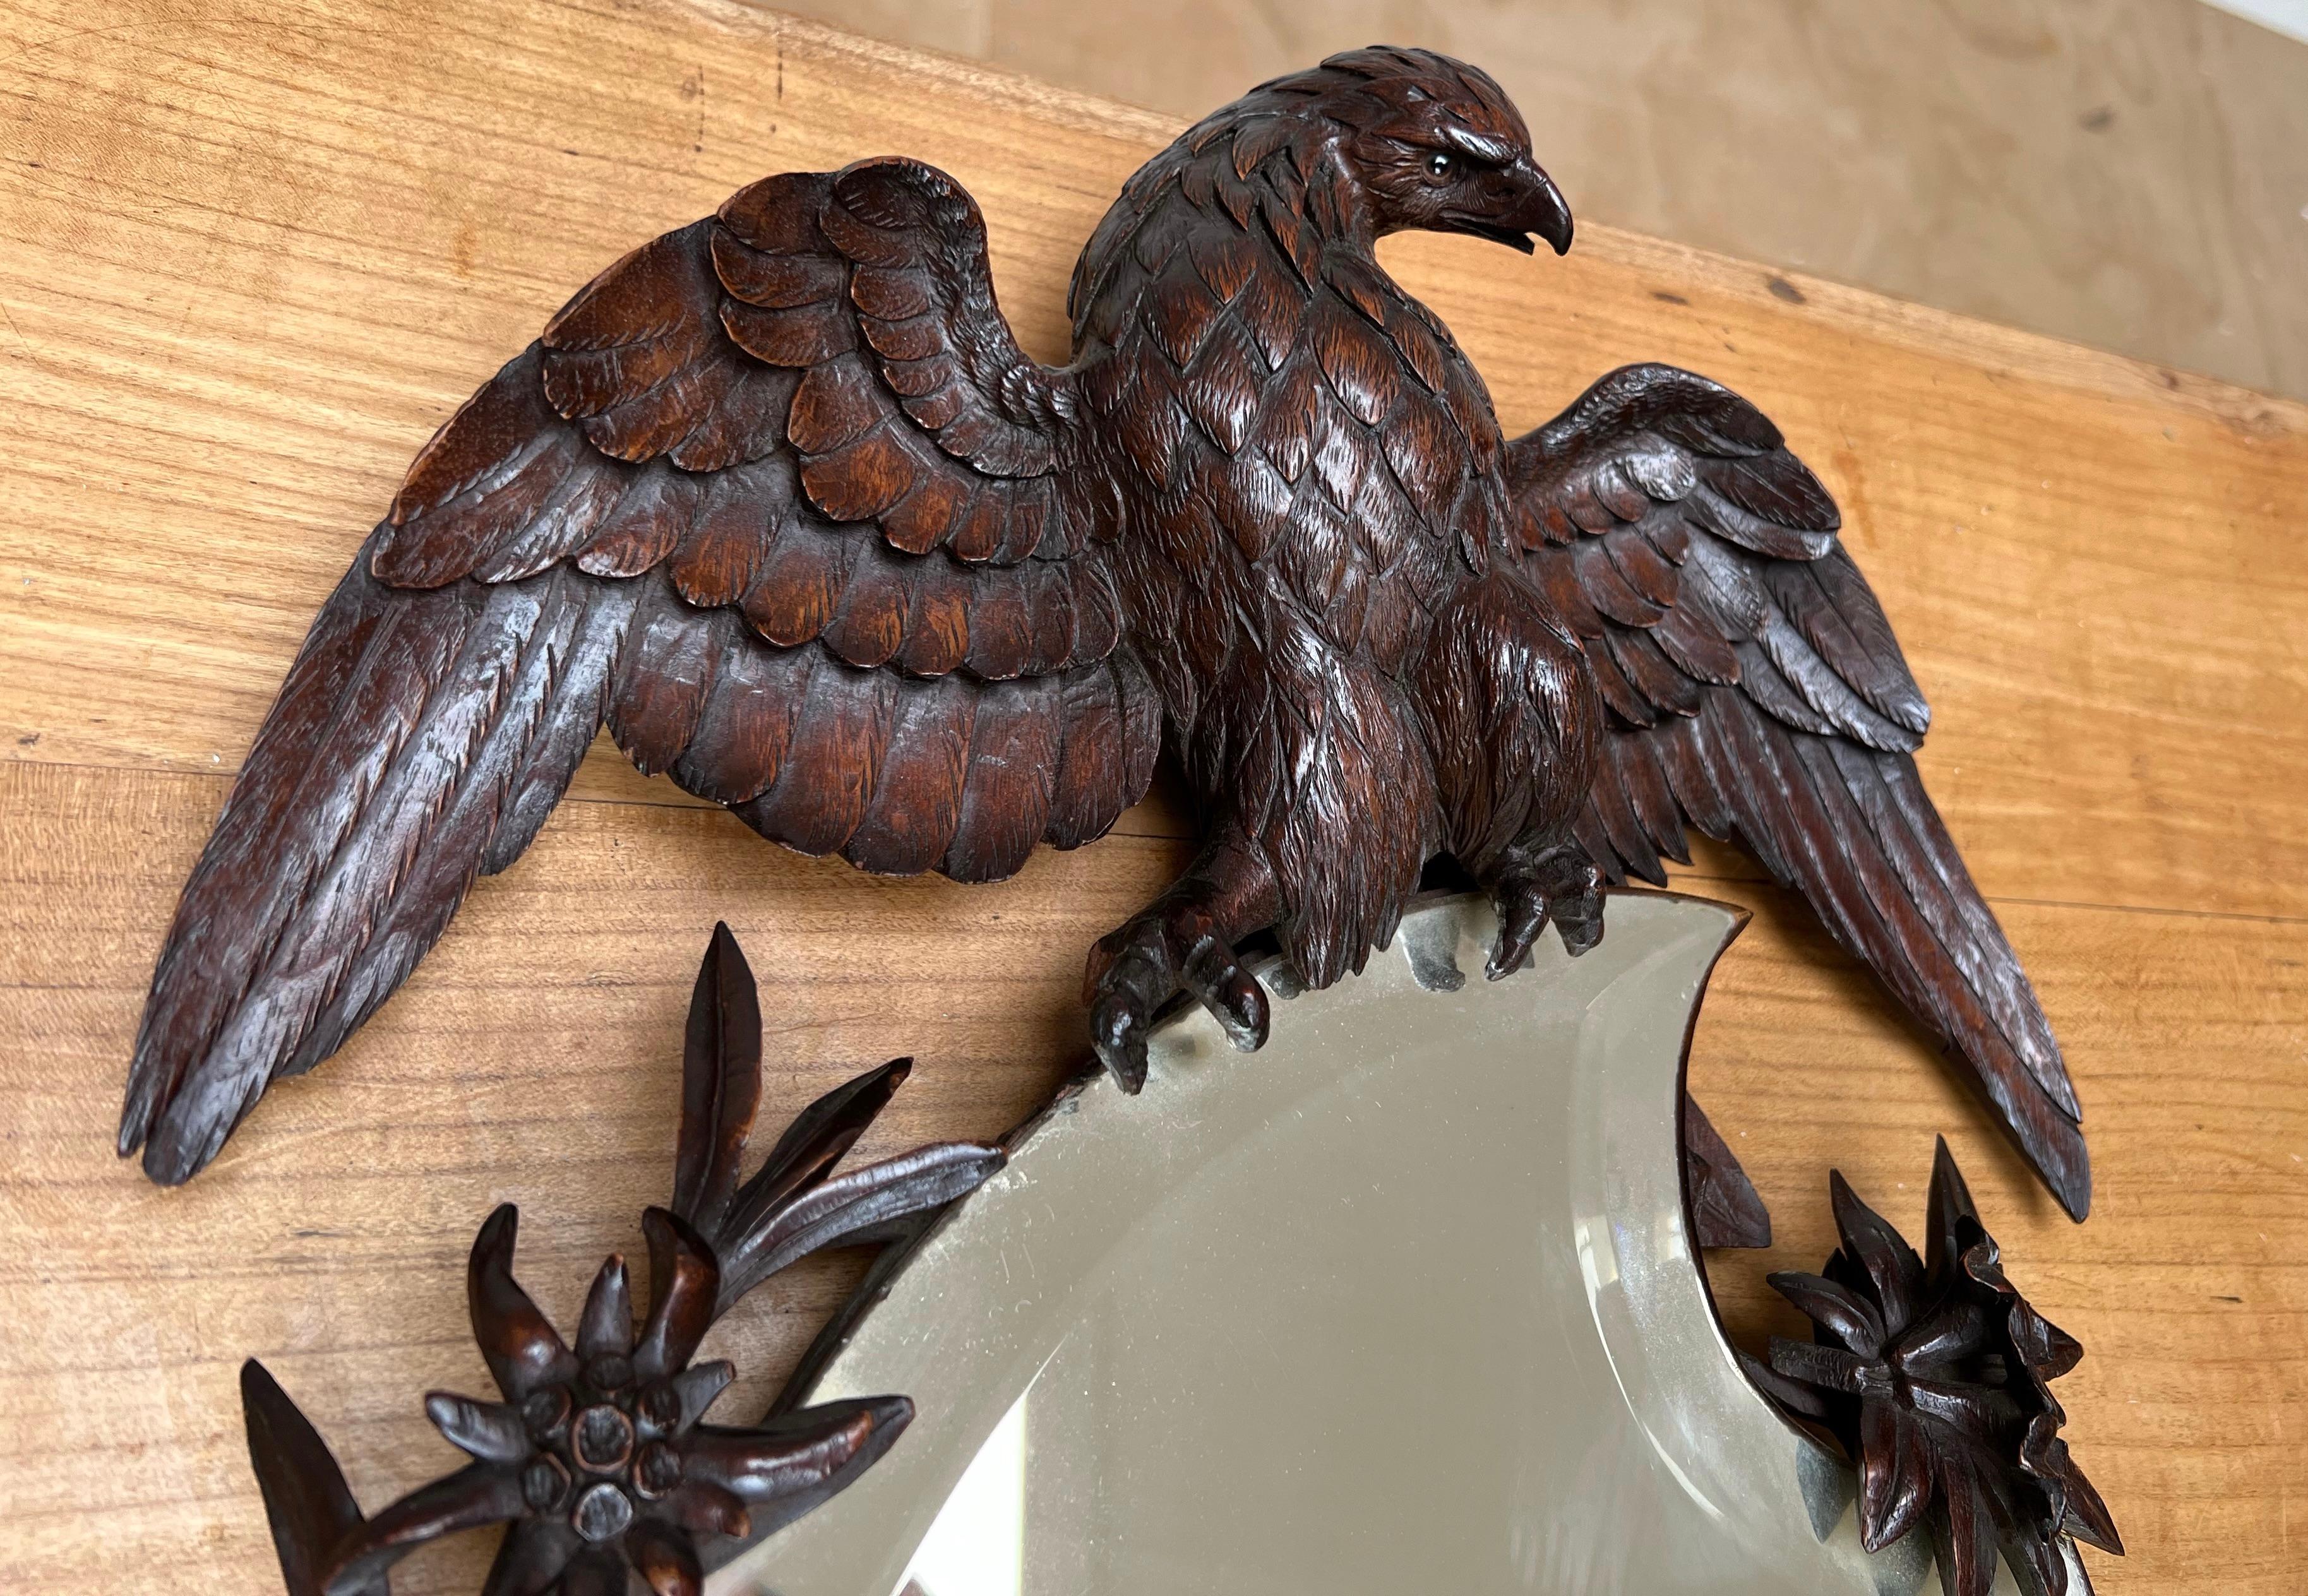 Rare, beautifully carved nutwood and highly decorative wall mirror.

If you are appreciative of rare and sculptural antiques then this Swiss BF mirror could be yours to own and enjoy soon. The quality and the patina of this winged eagle sculpture